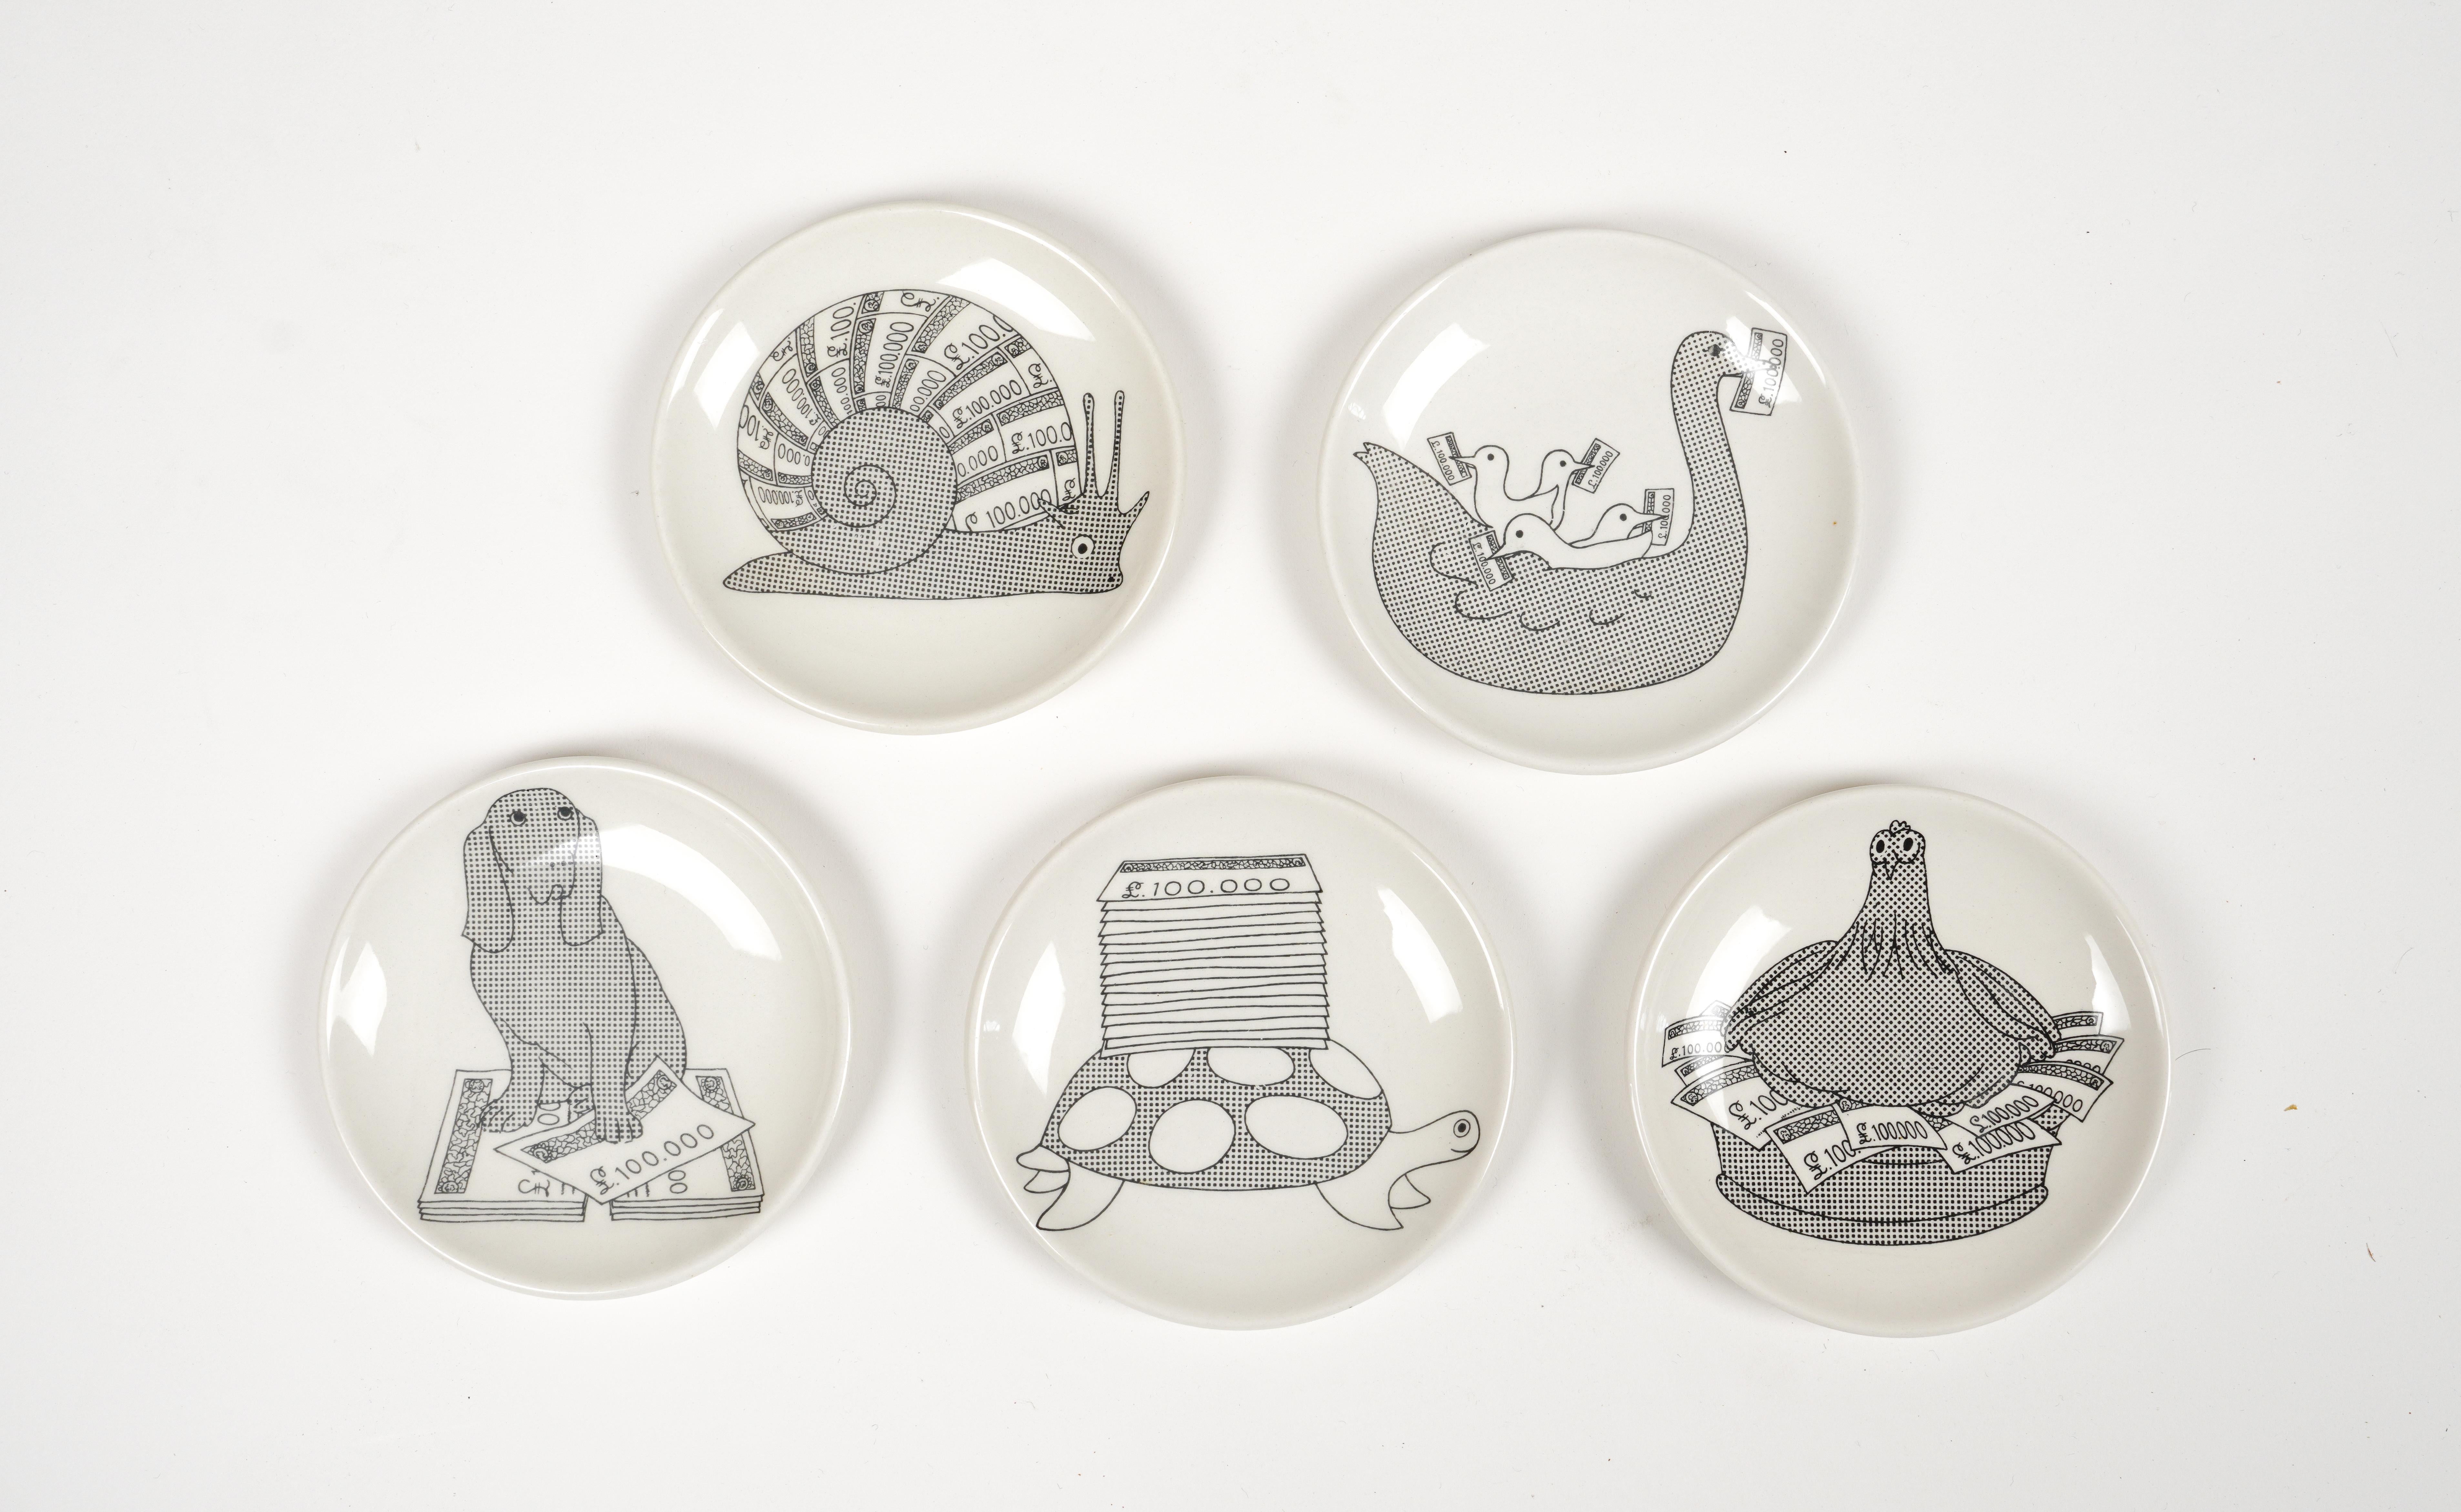 Midcentury a set of five beautiful black and white small plates or coasters in porcelain displaying drawn animals with money (snail, dog, hen, turtle, duck) by Piero Fornasetti.

Made in Italy in the 1950s.

Stamped on the bottom as shown in the